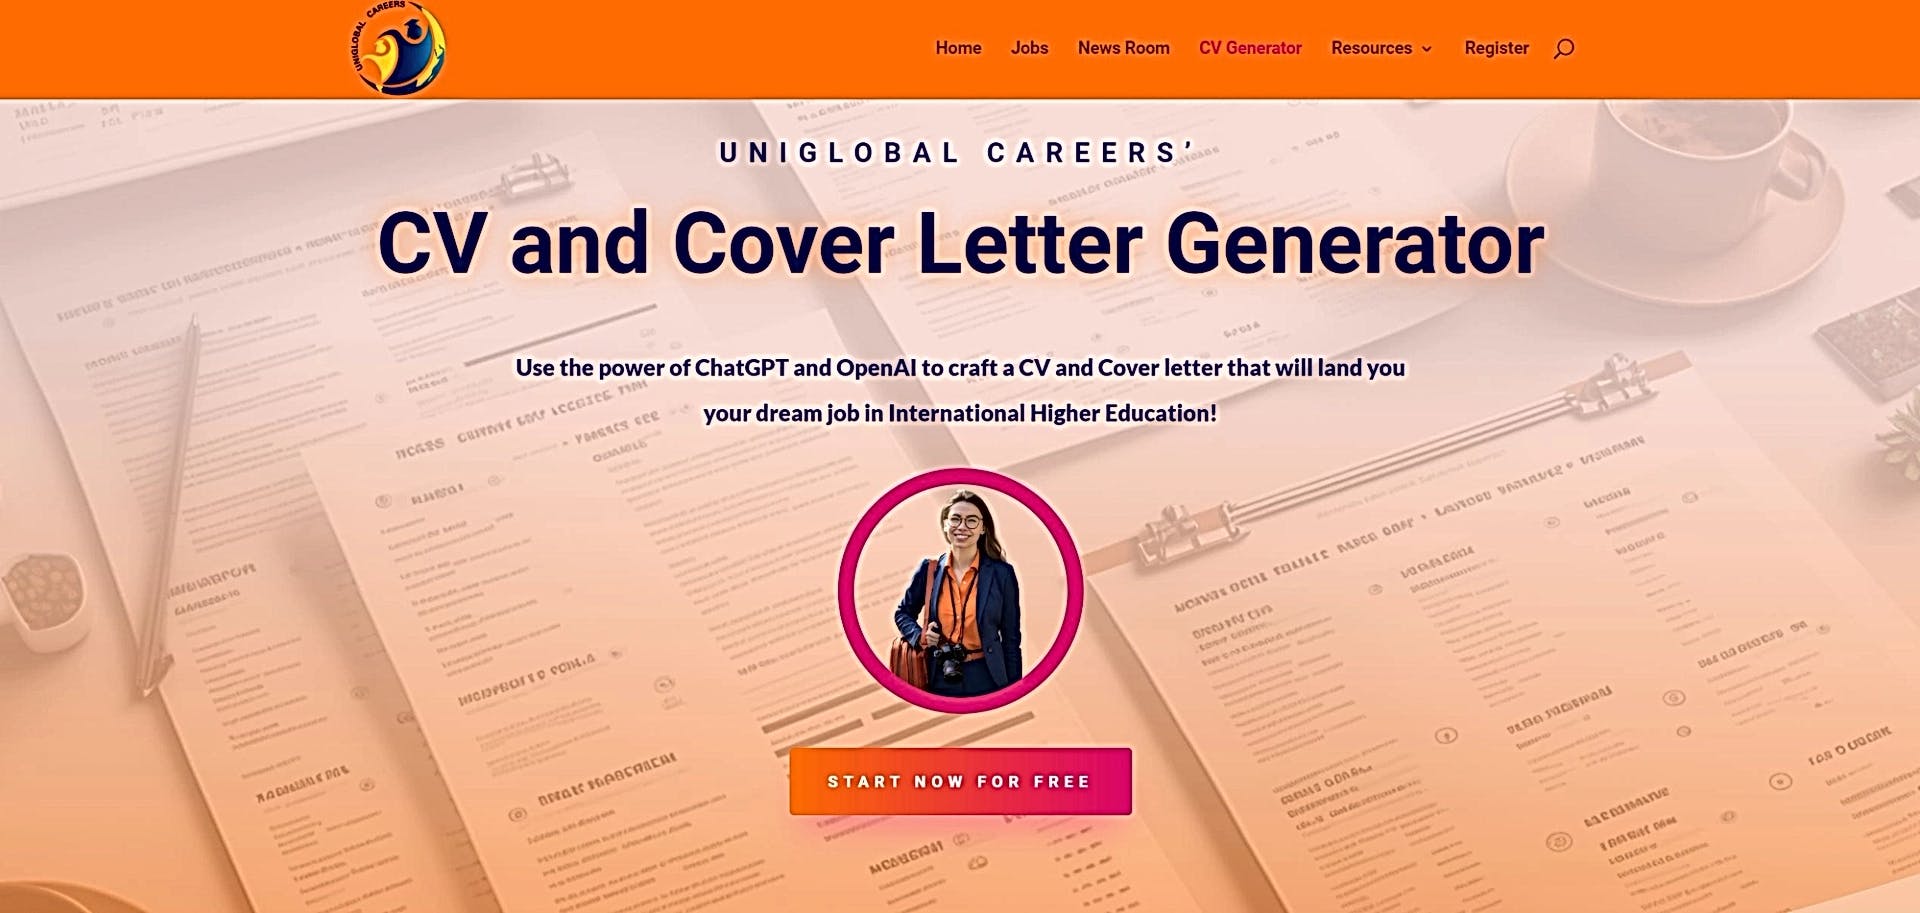 UniGlobal CV and Cover Letter Generator featured